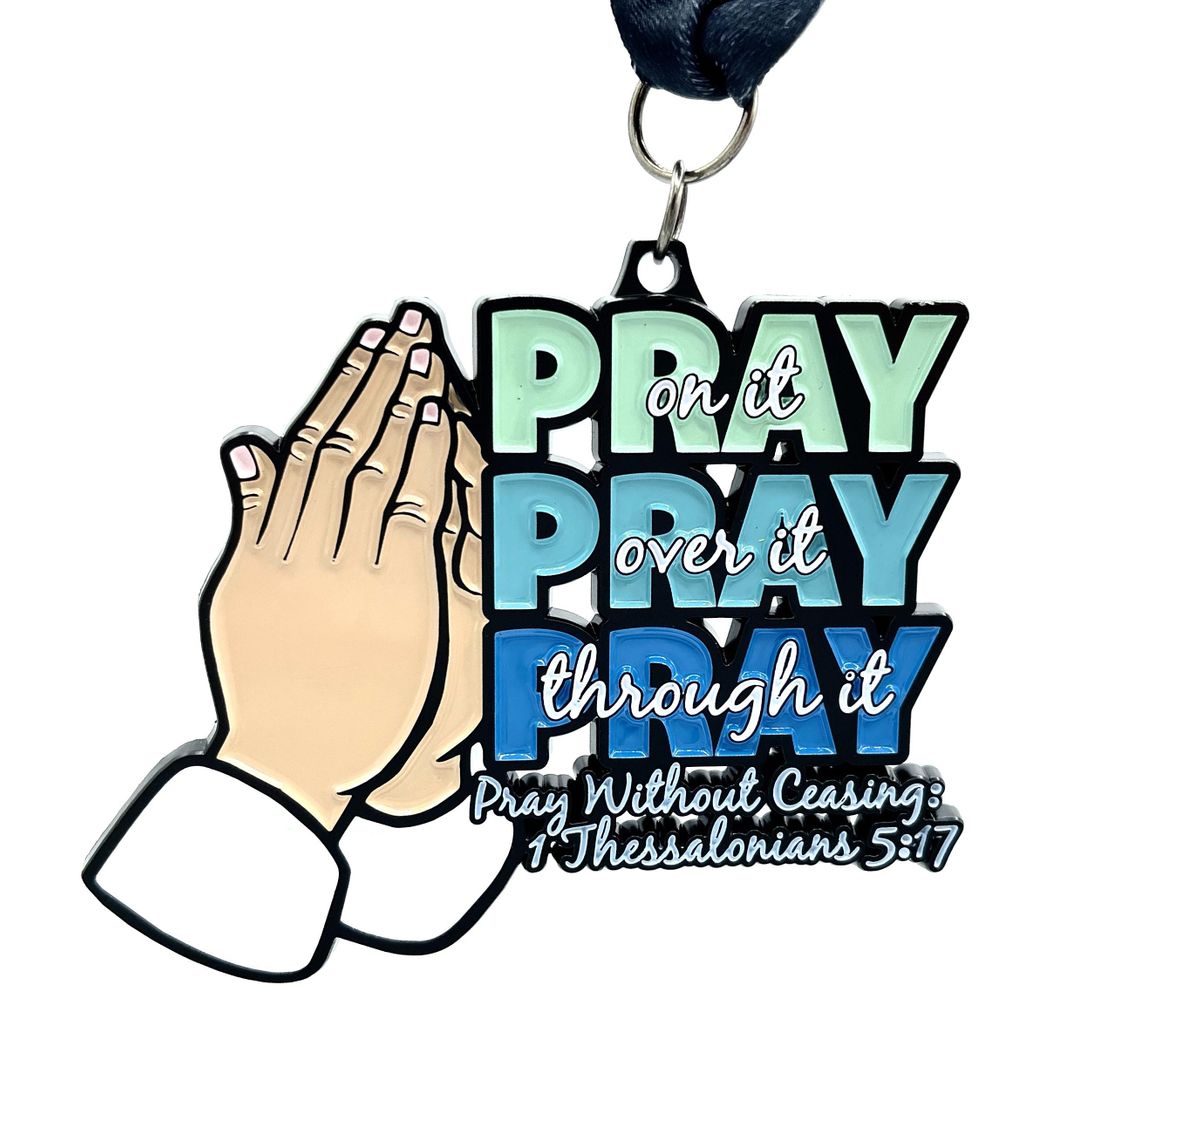 2021 Pray Without Ceasing 1M 5K 10K 13.1 26.2-Participate from Home.Save $5